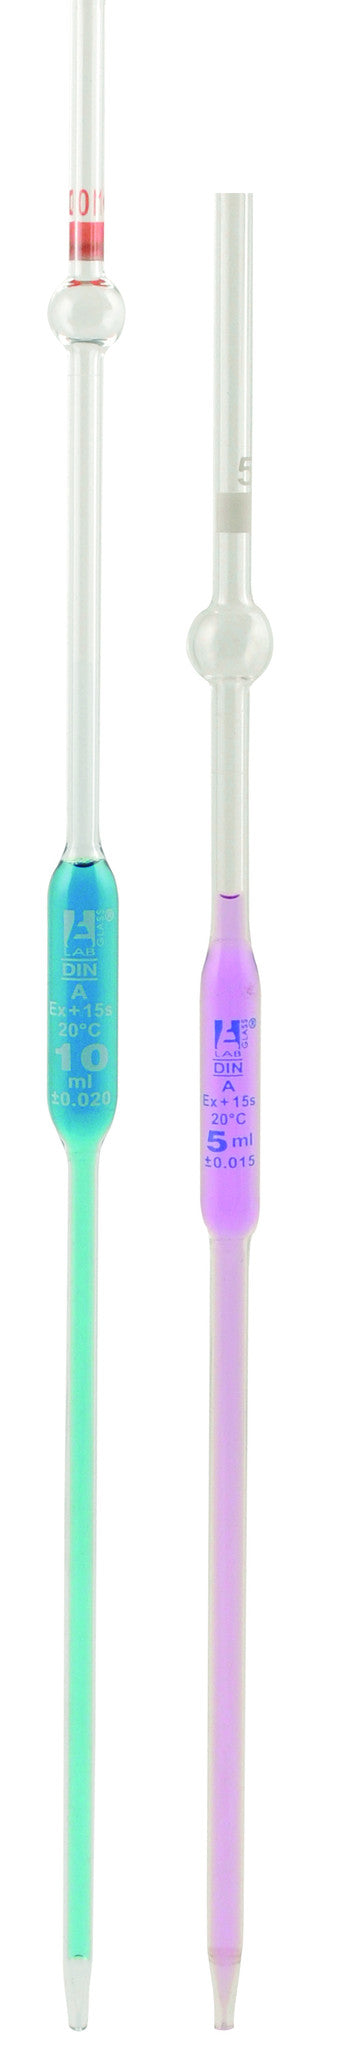 Pipette class 'B' with safety bulb, 15ml